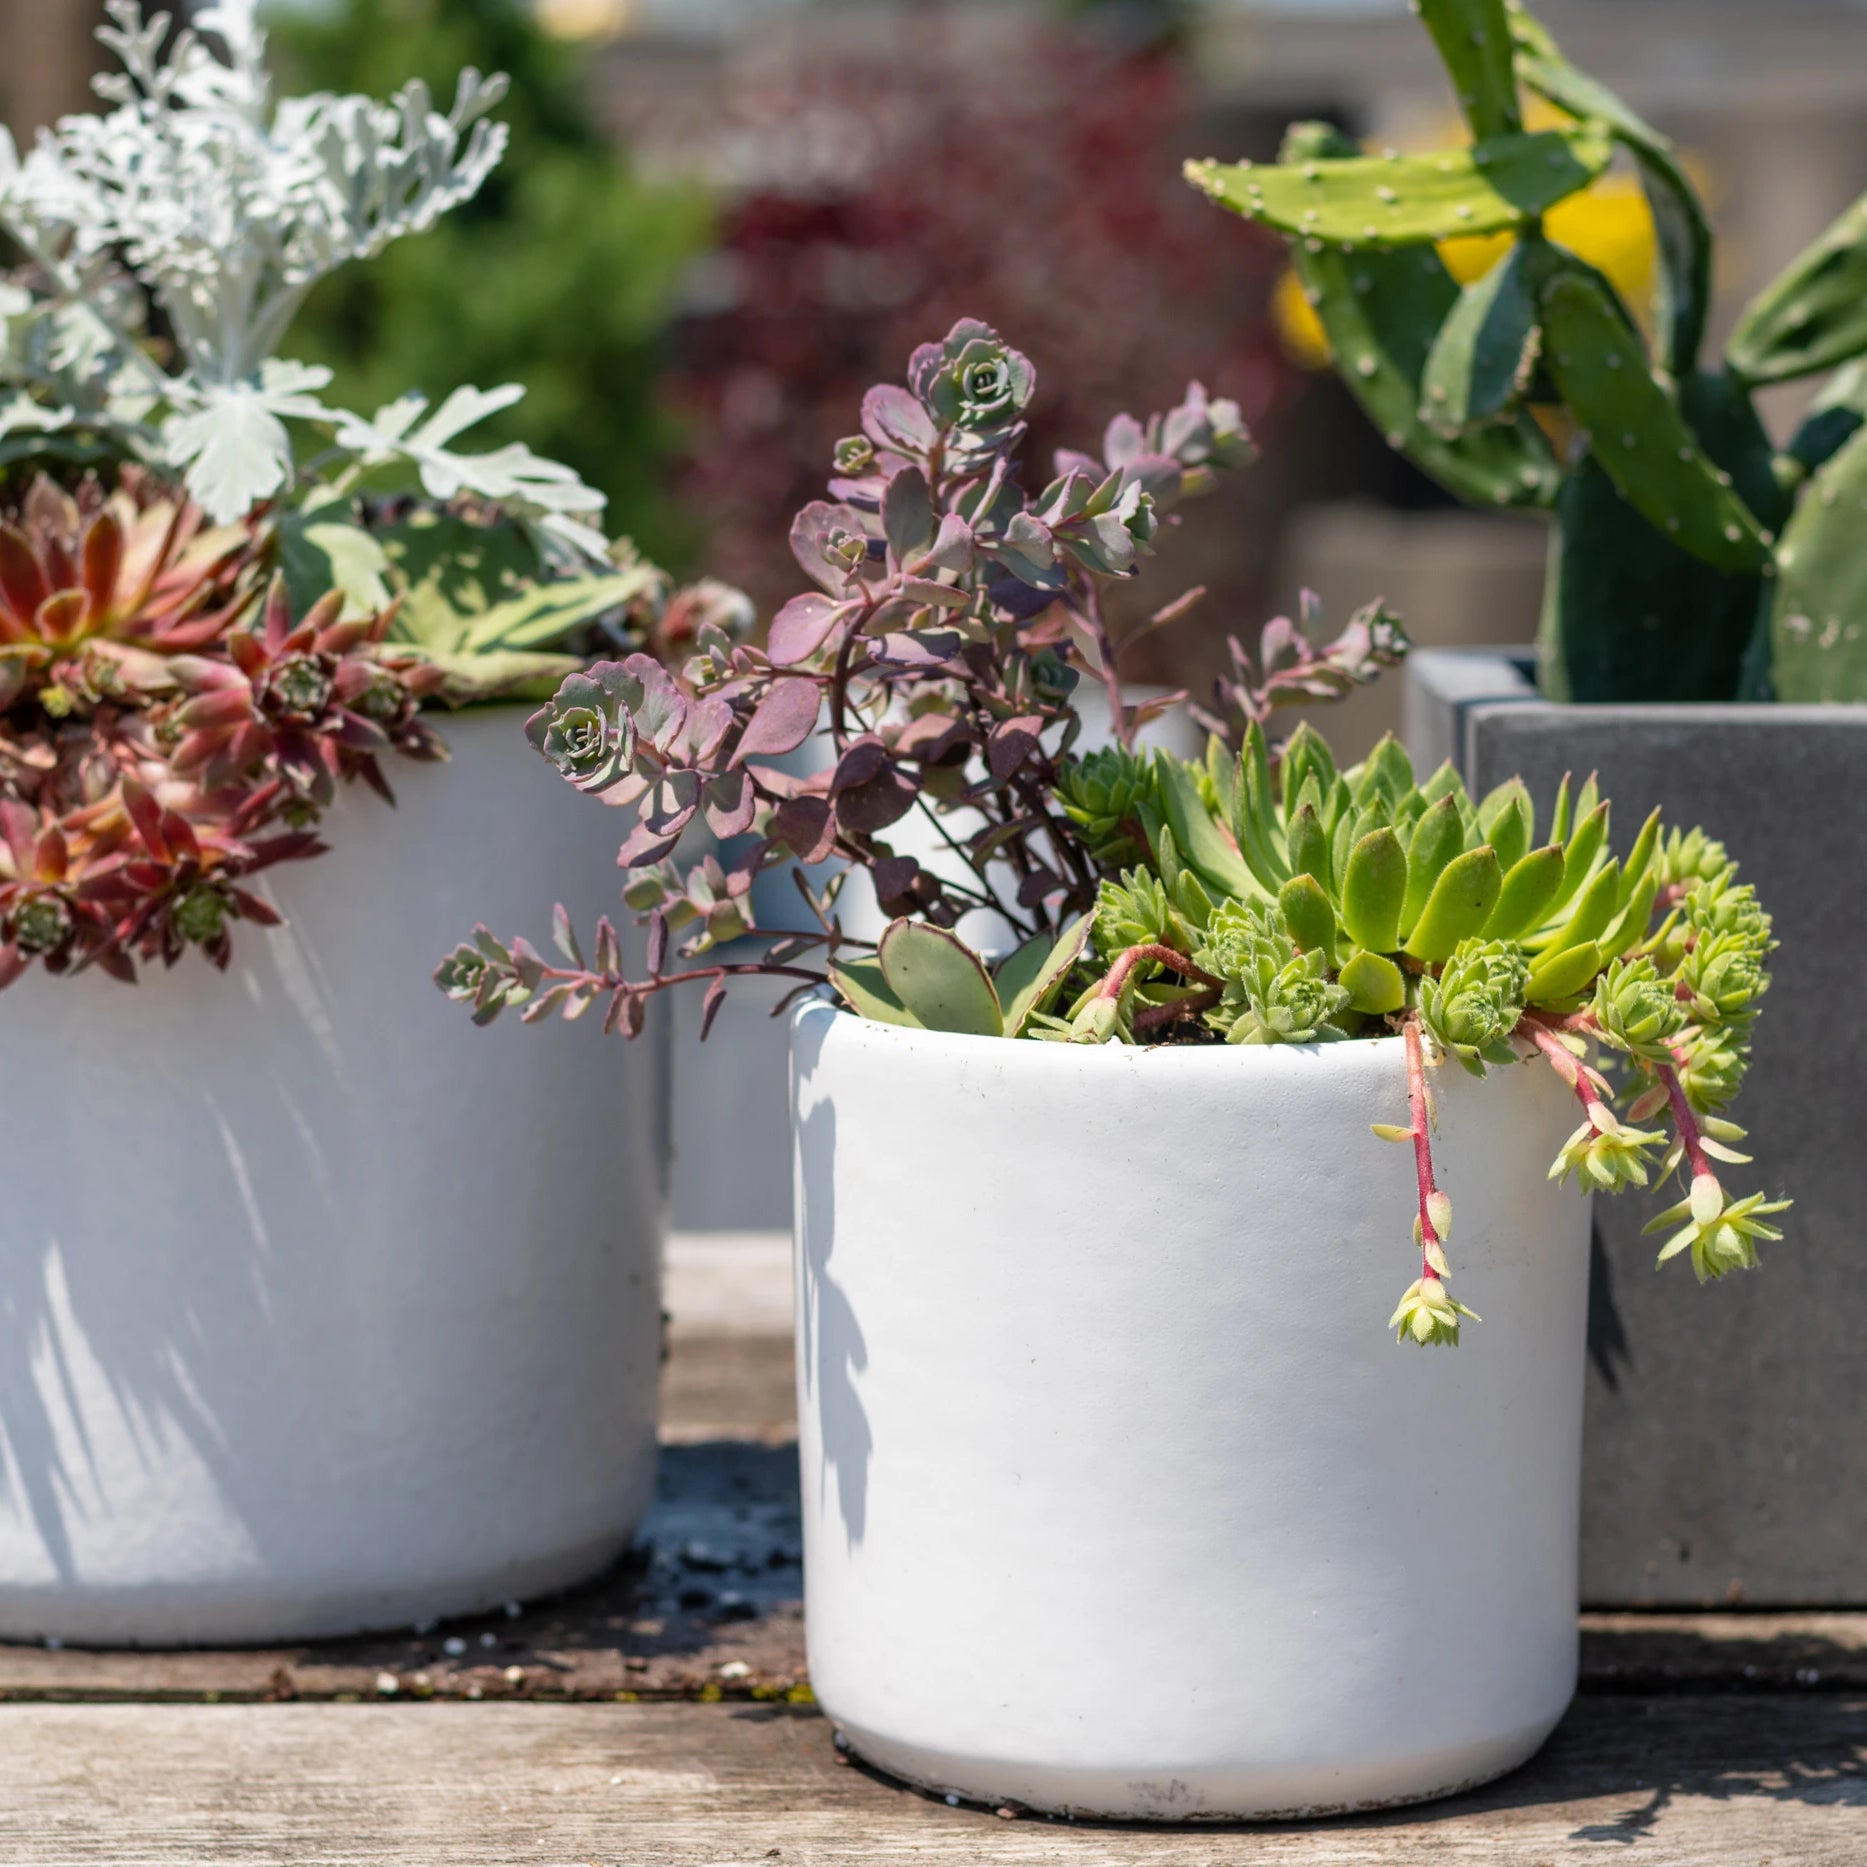 Outdoor planted succulent containers in the sunshine